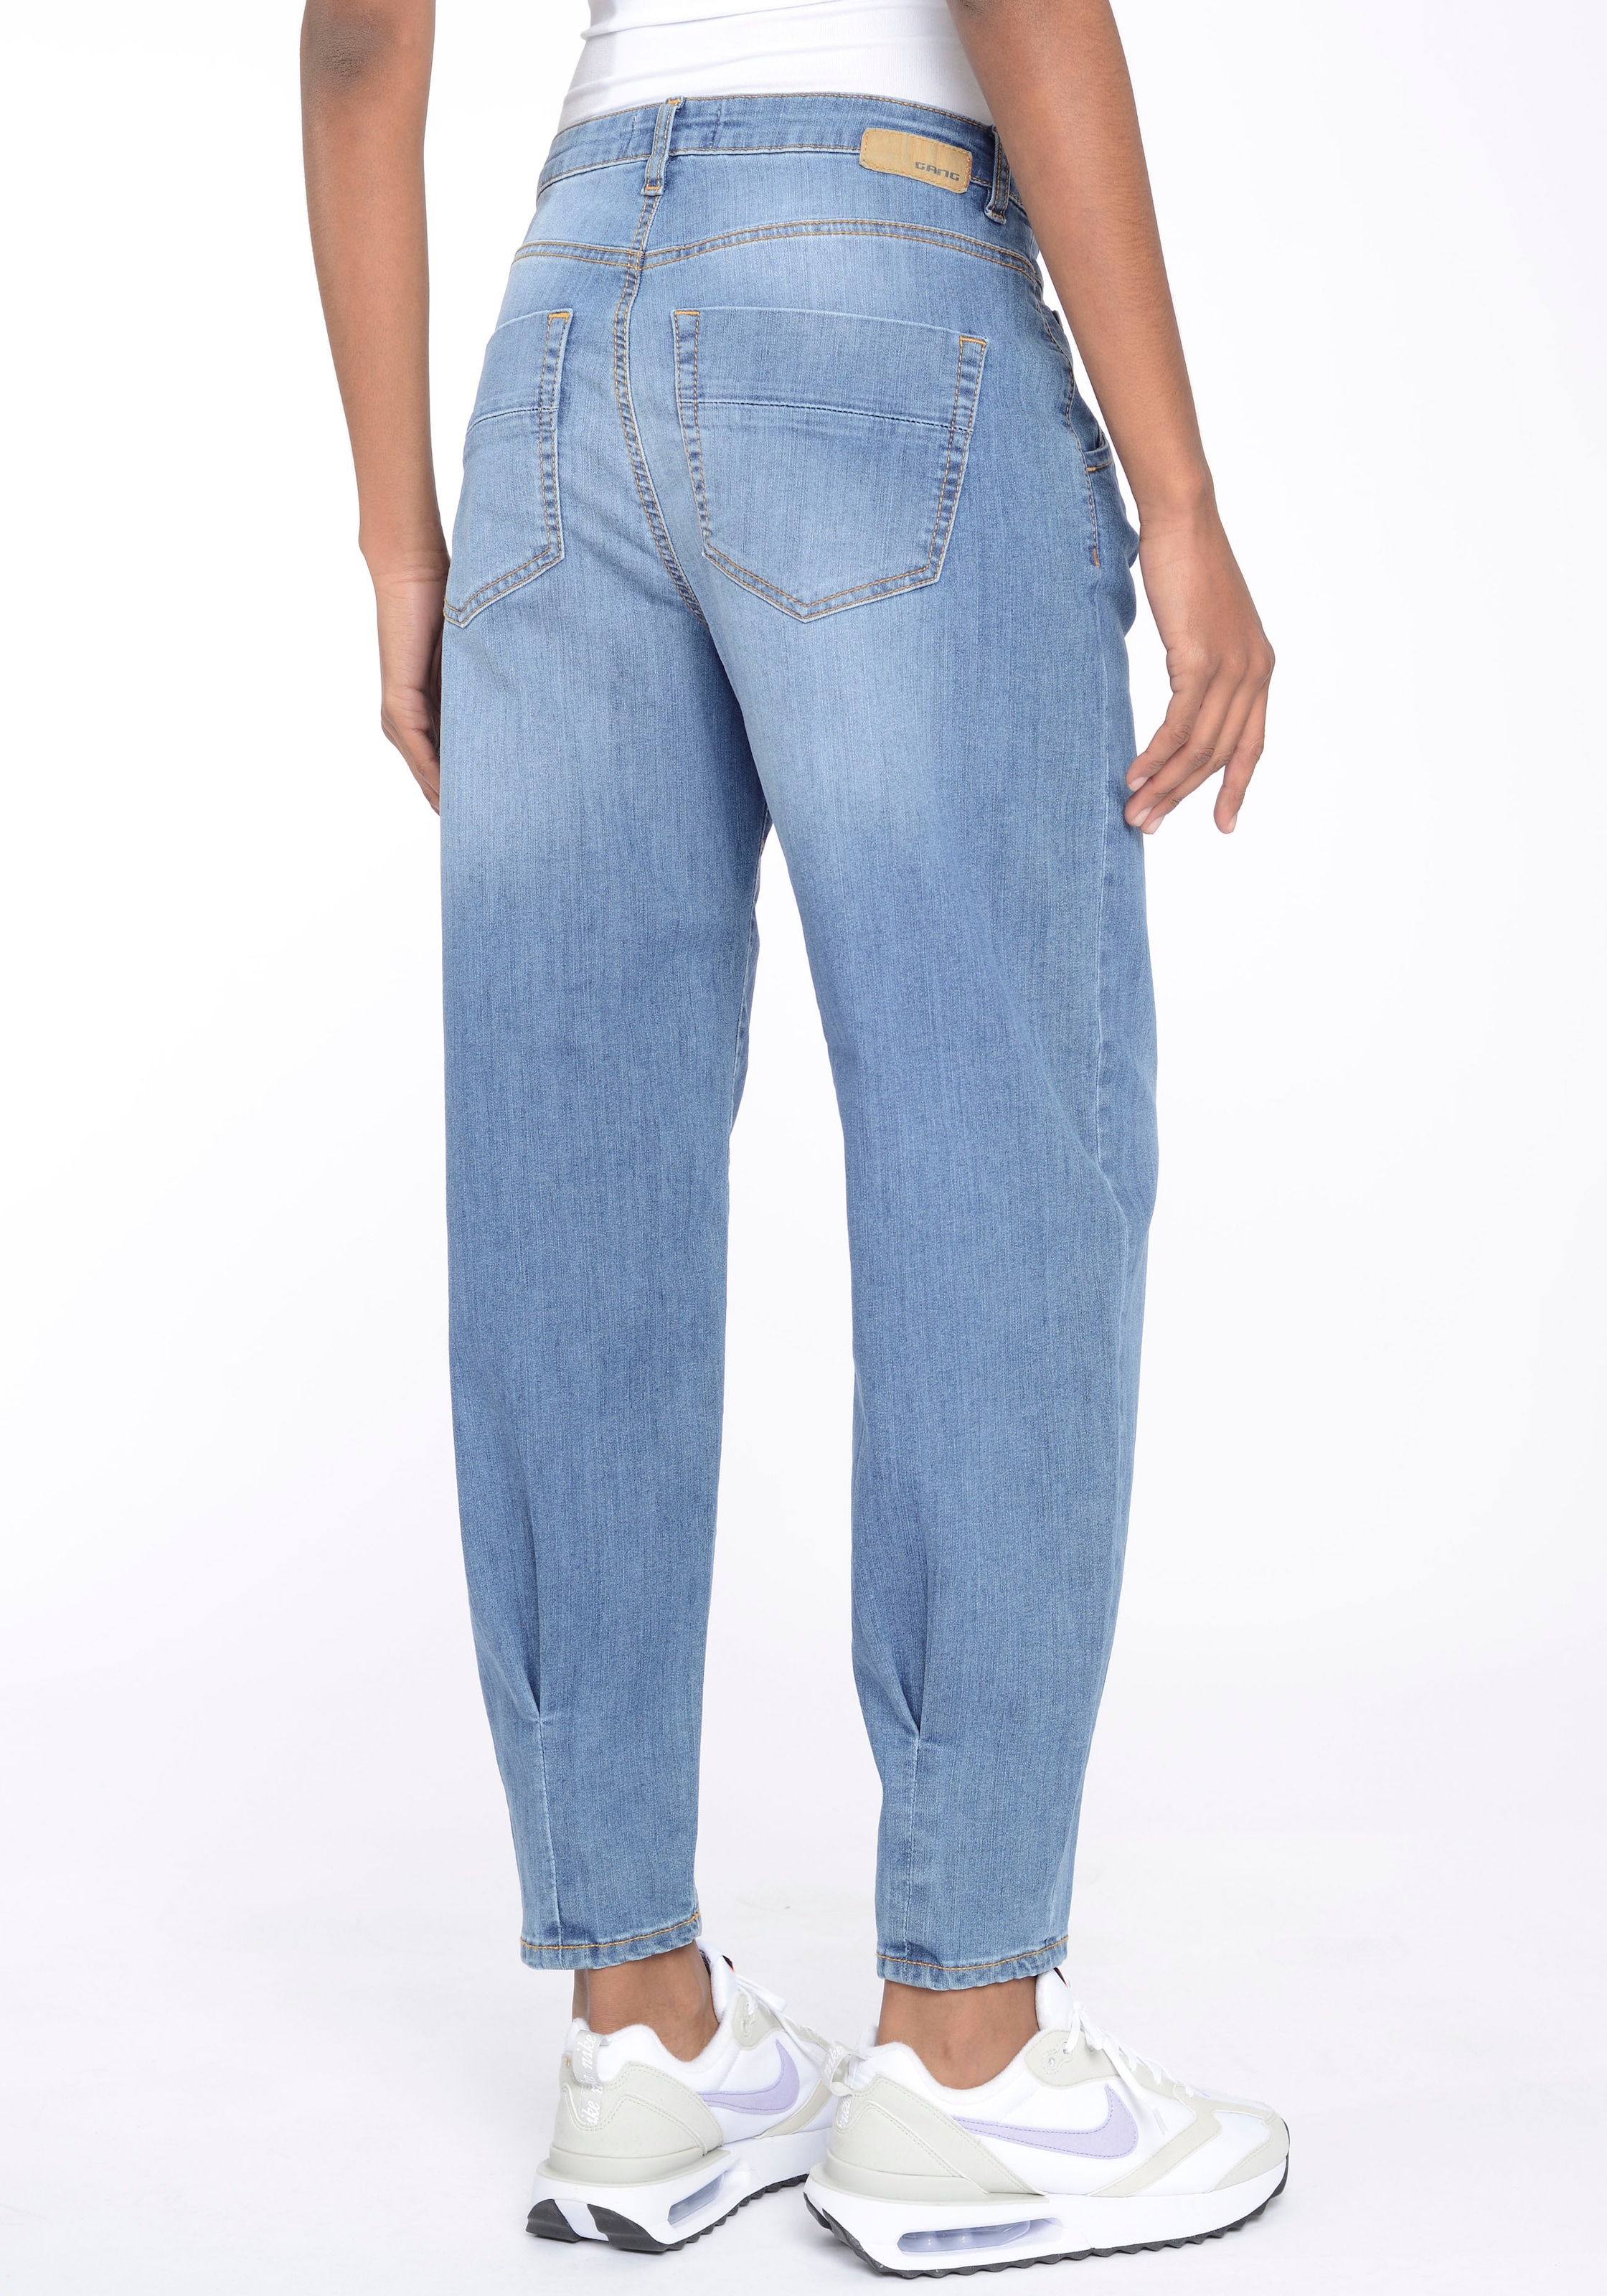 Shop in Fit »94SILVIA«, bestellen Used Bequeme OTTO GANG Online Waschung cooler Ballon Jeans im